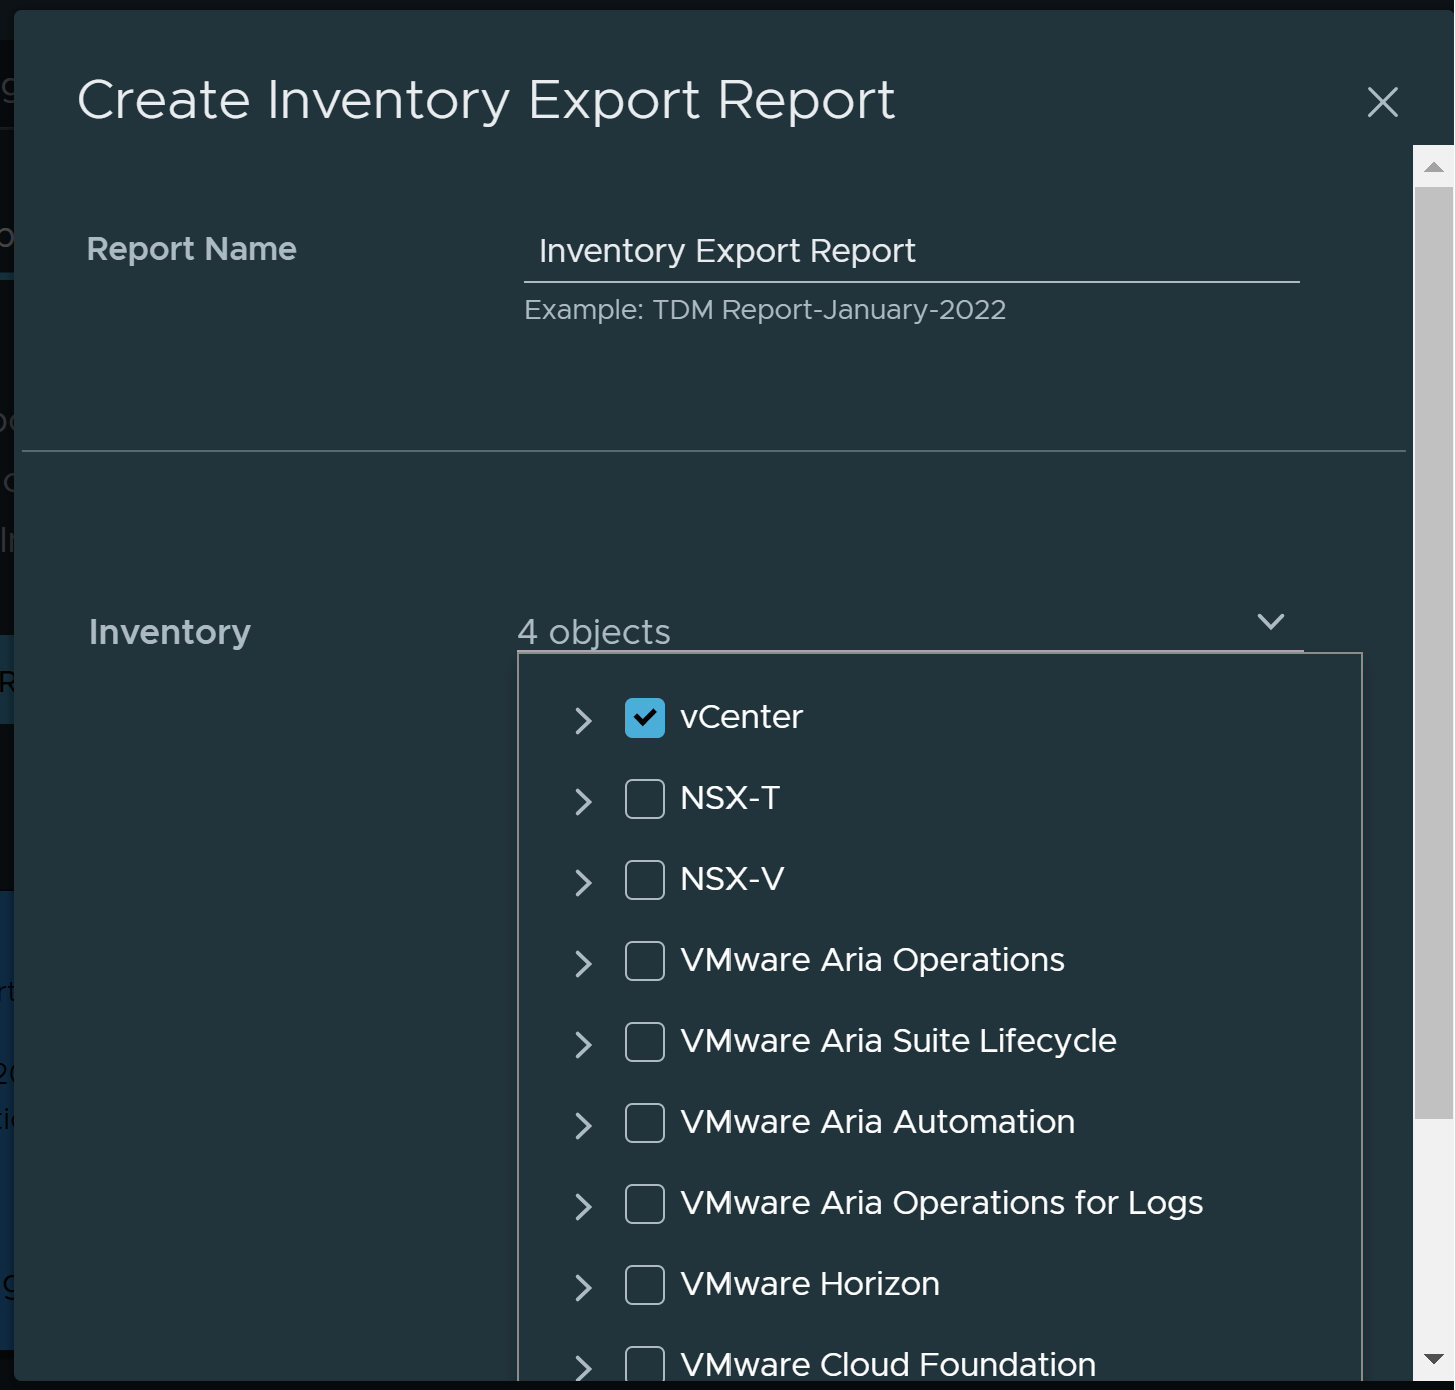 Create Inventory Export Report pop-up is shown. Report Name is entered and Inventory is selected.